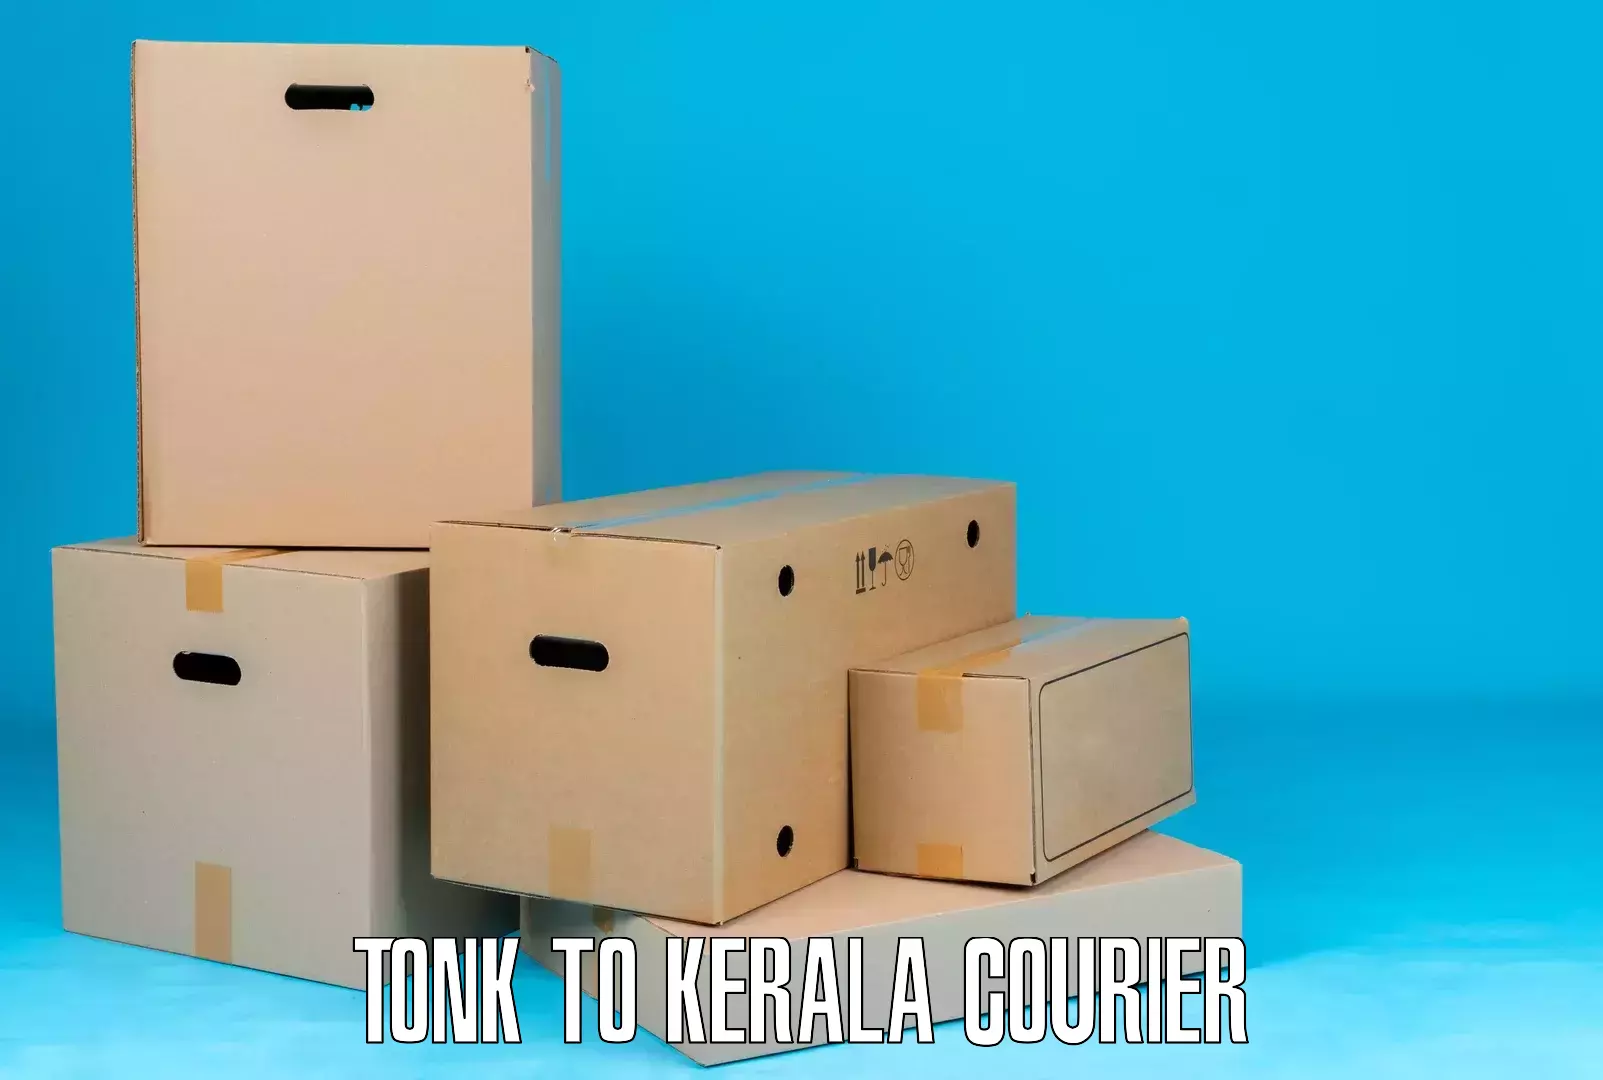 Premium courier services Tonk to Cochin University of Science and Technology